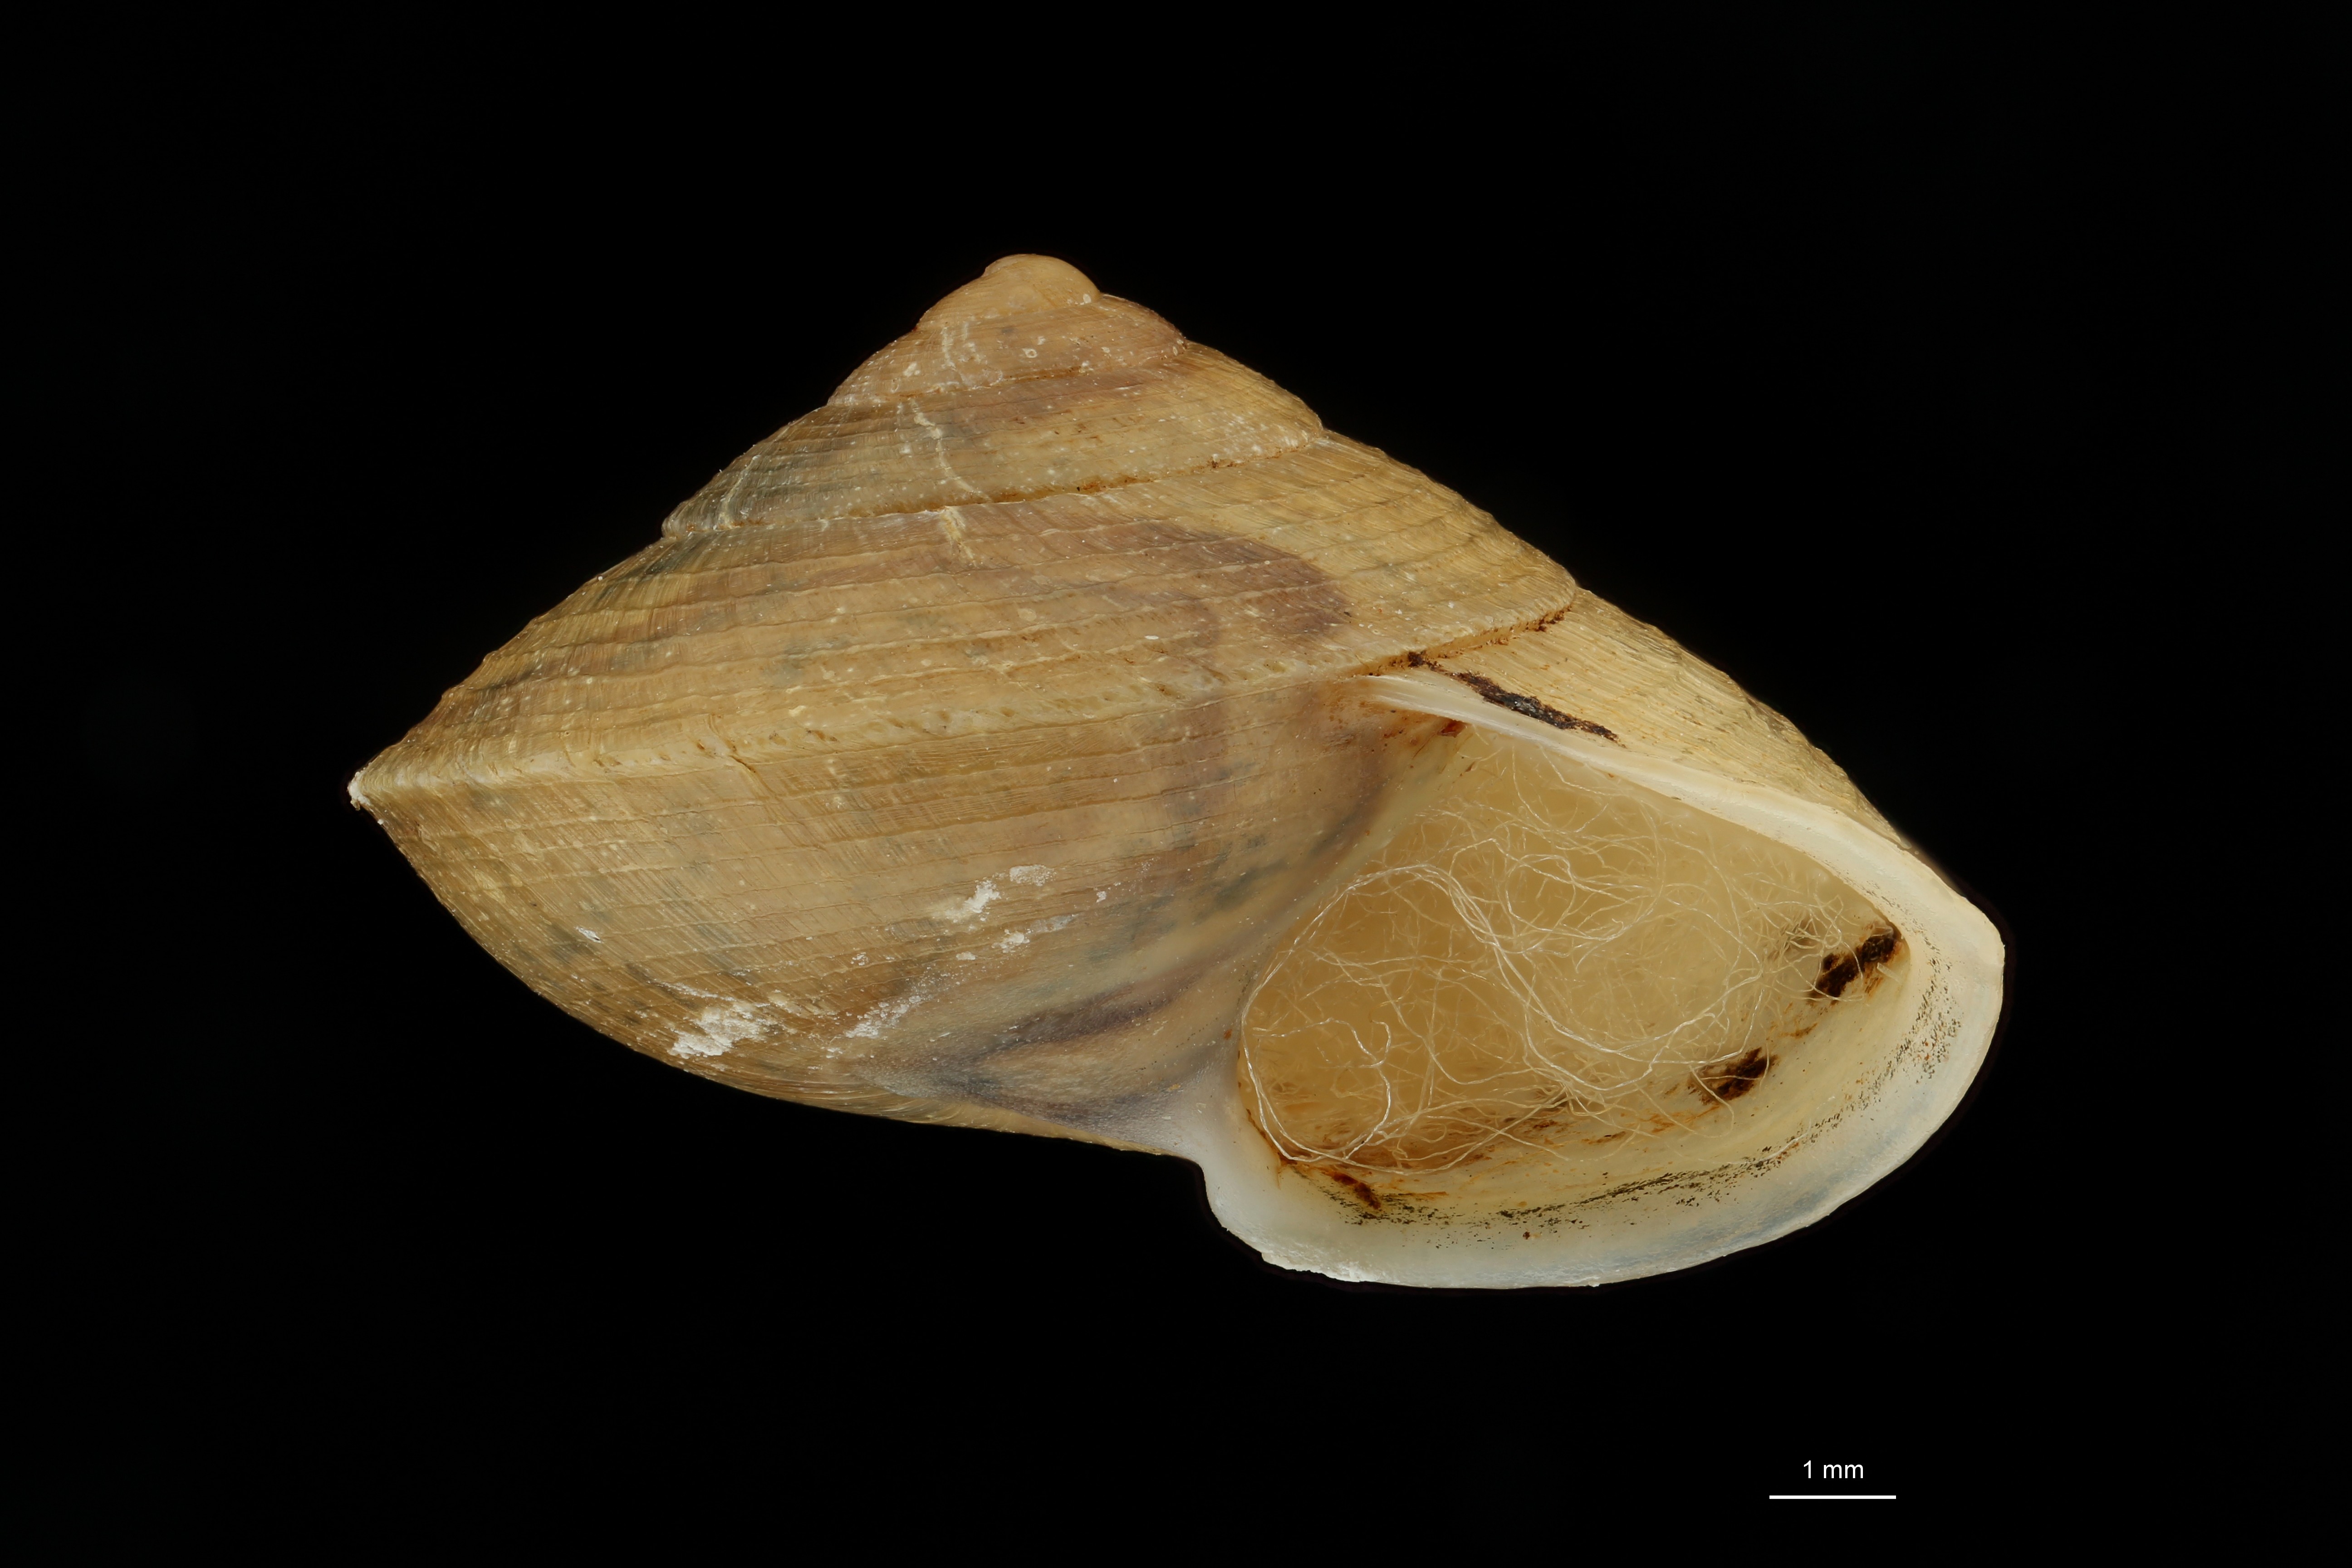 BE-RBINS-INV HOLOTYPE MT 42 Helicina lirifera LATERAL ZS DMap Scaled.jpg